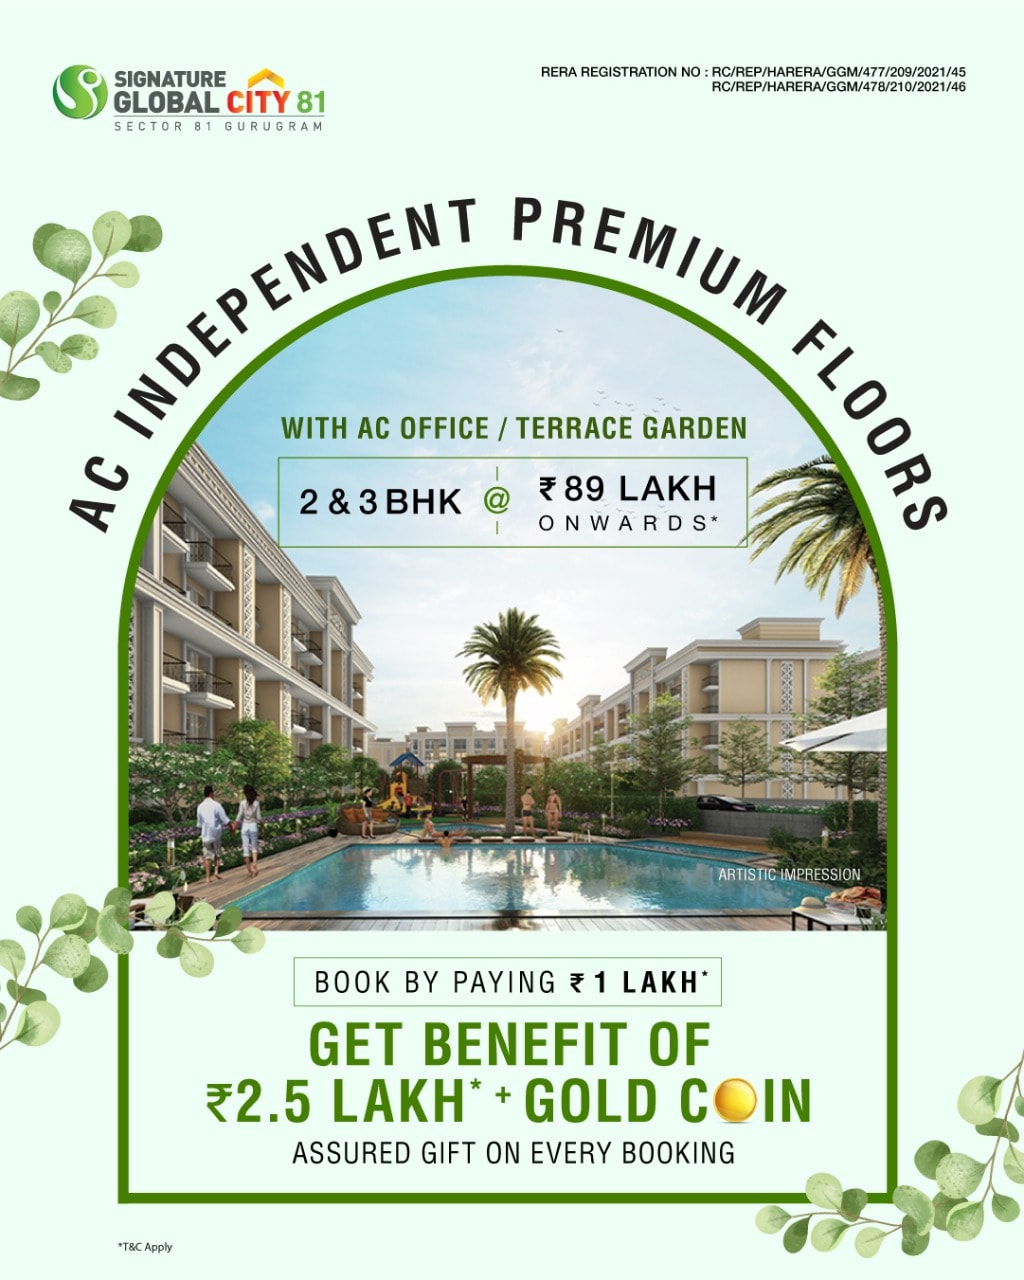 Book by paying Rs 1 Lacs & get  benefit of Rs 2.5 Lac and gold coin at Signature Global City 81, Gurgaon Update